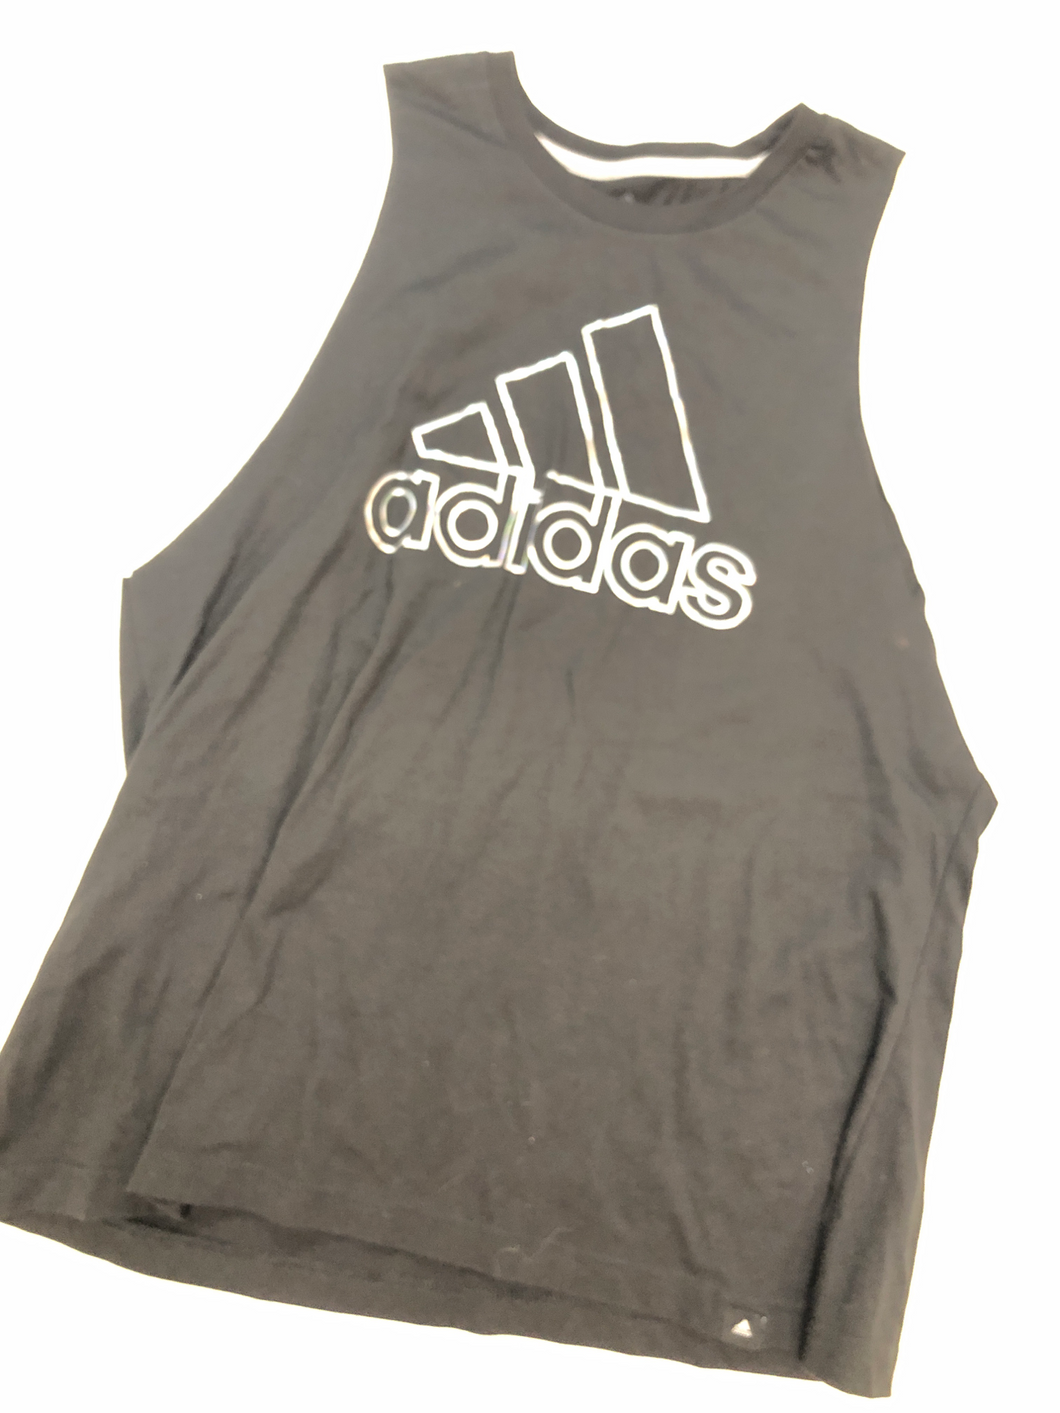 Adidas Athletic Top Size Extra Large